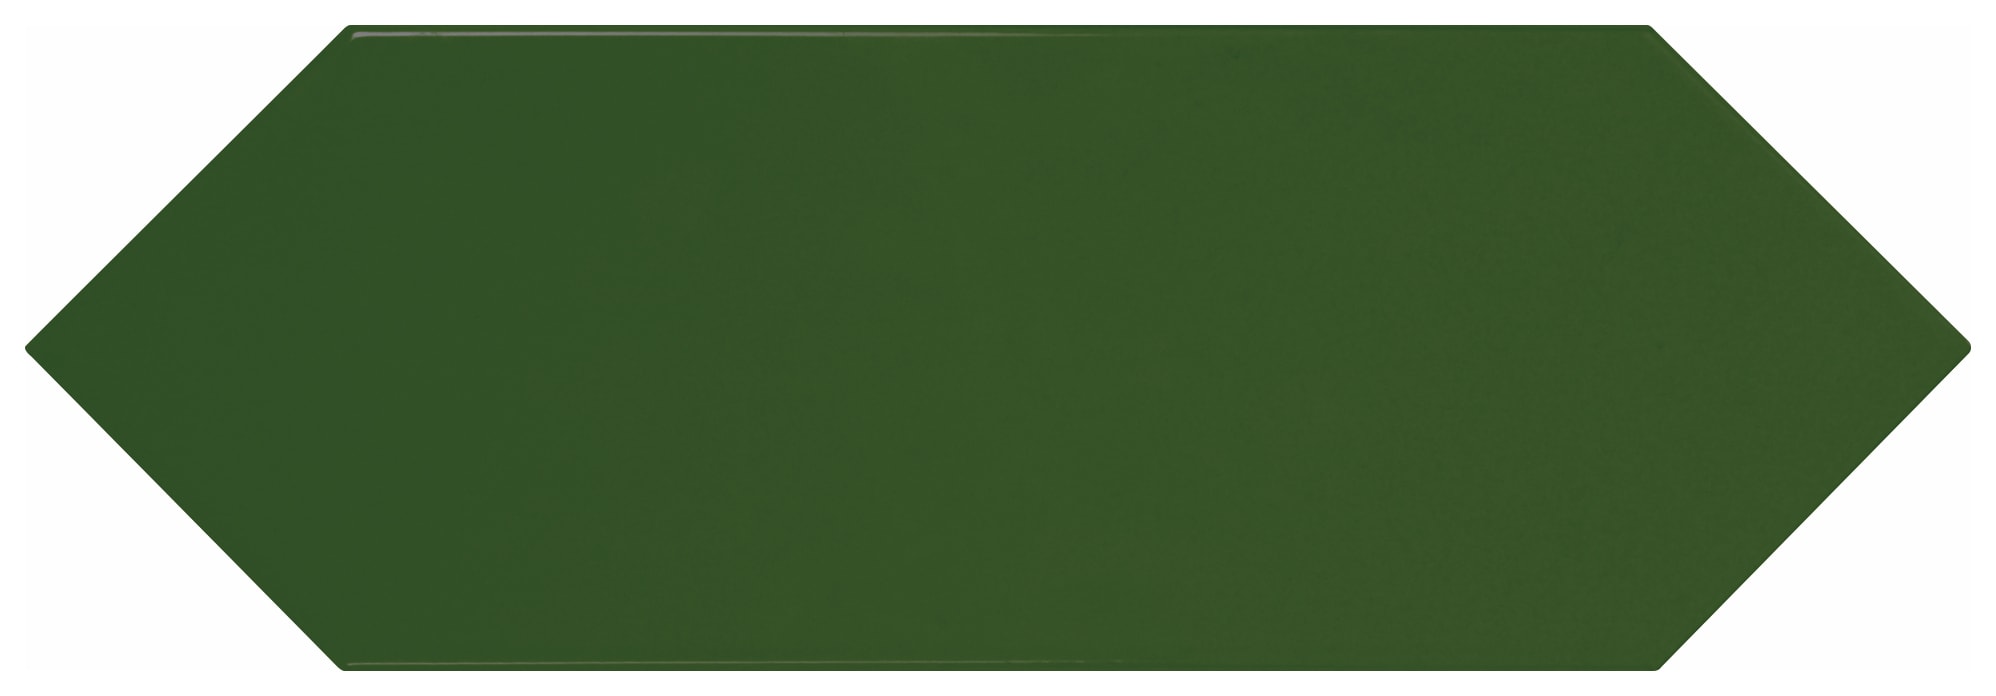 Wickes Boutique Clover Green Gloss Ceramic Wall Tile